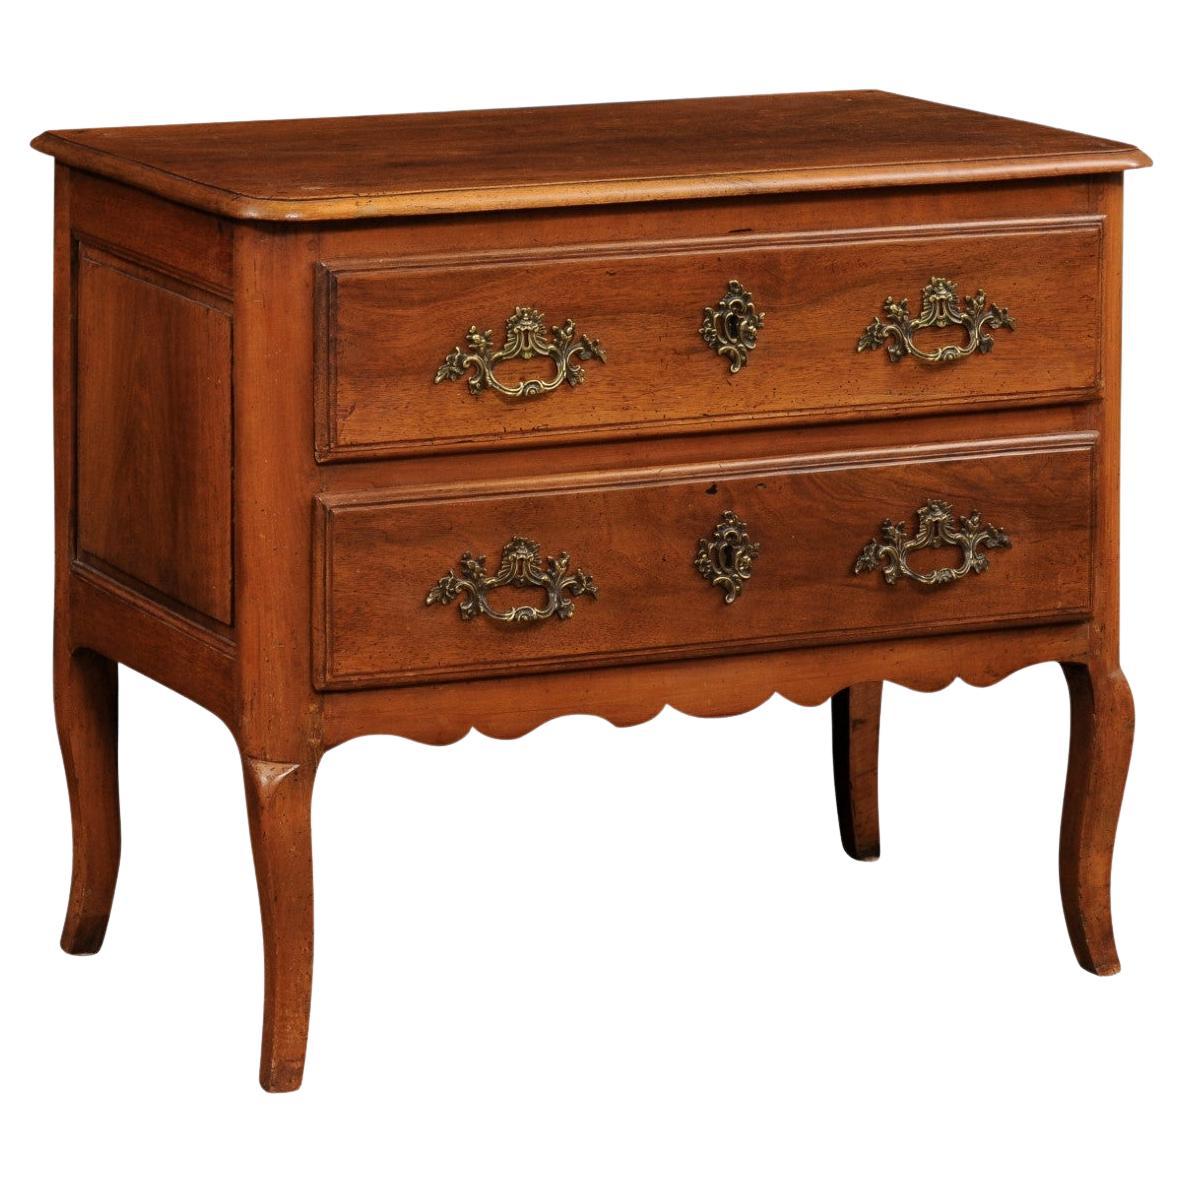 French Louis XV 1790s Walnut Commode Sauteuse with Two Drawers and Cabriole Legs